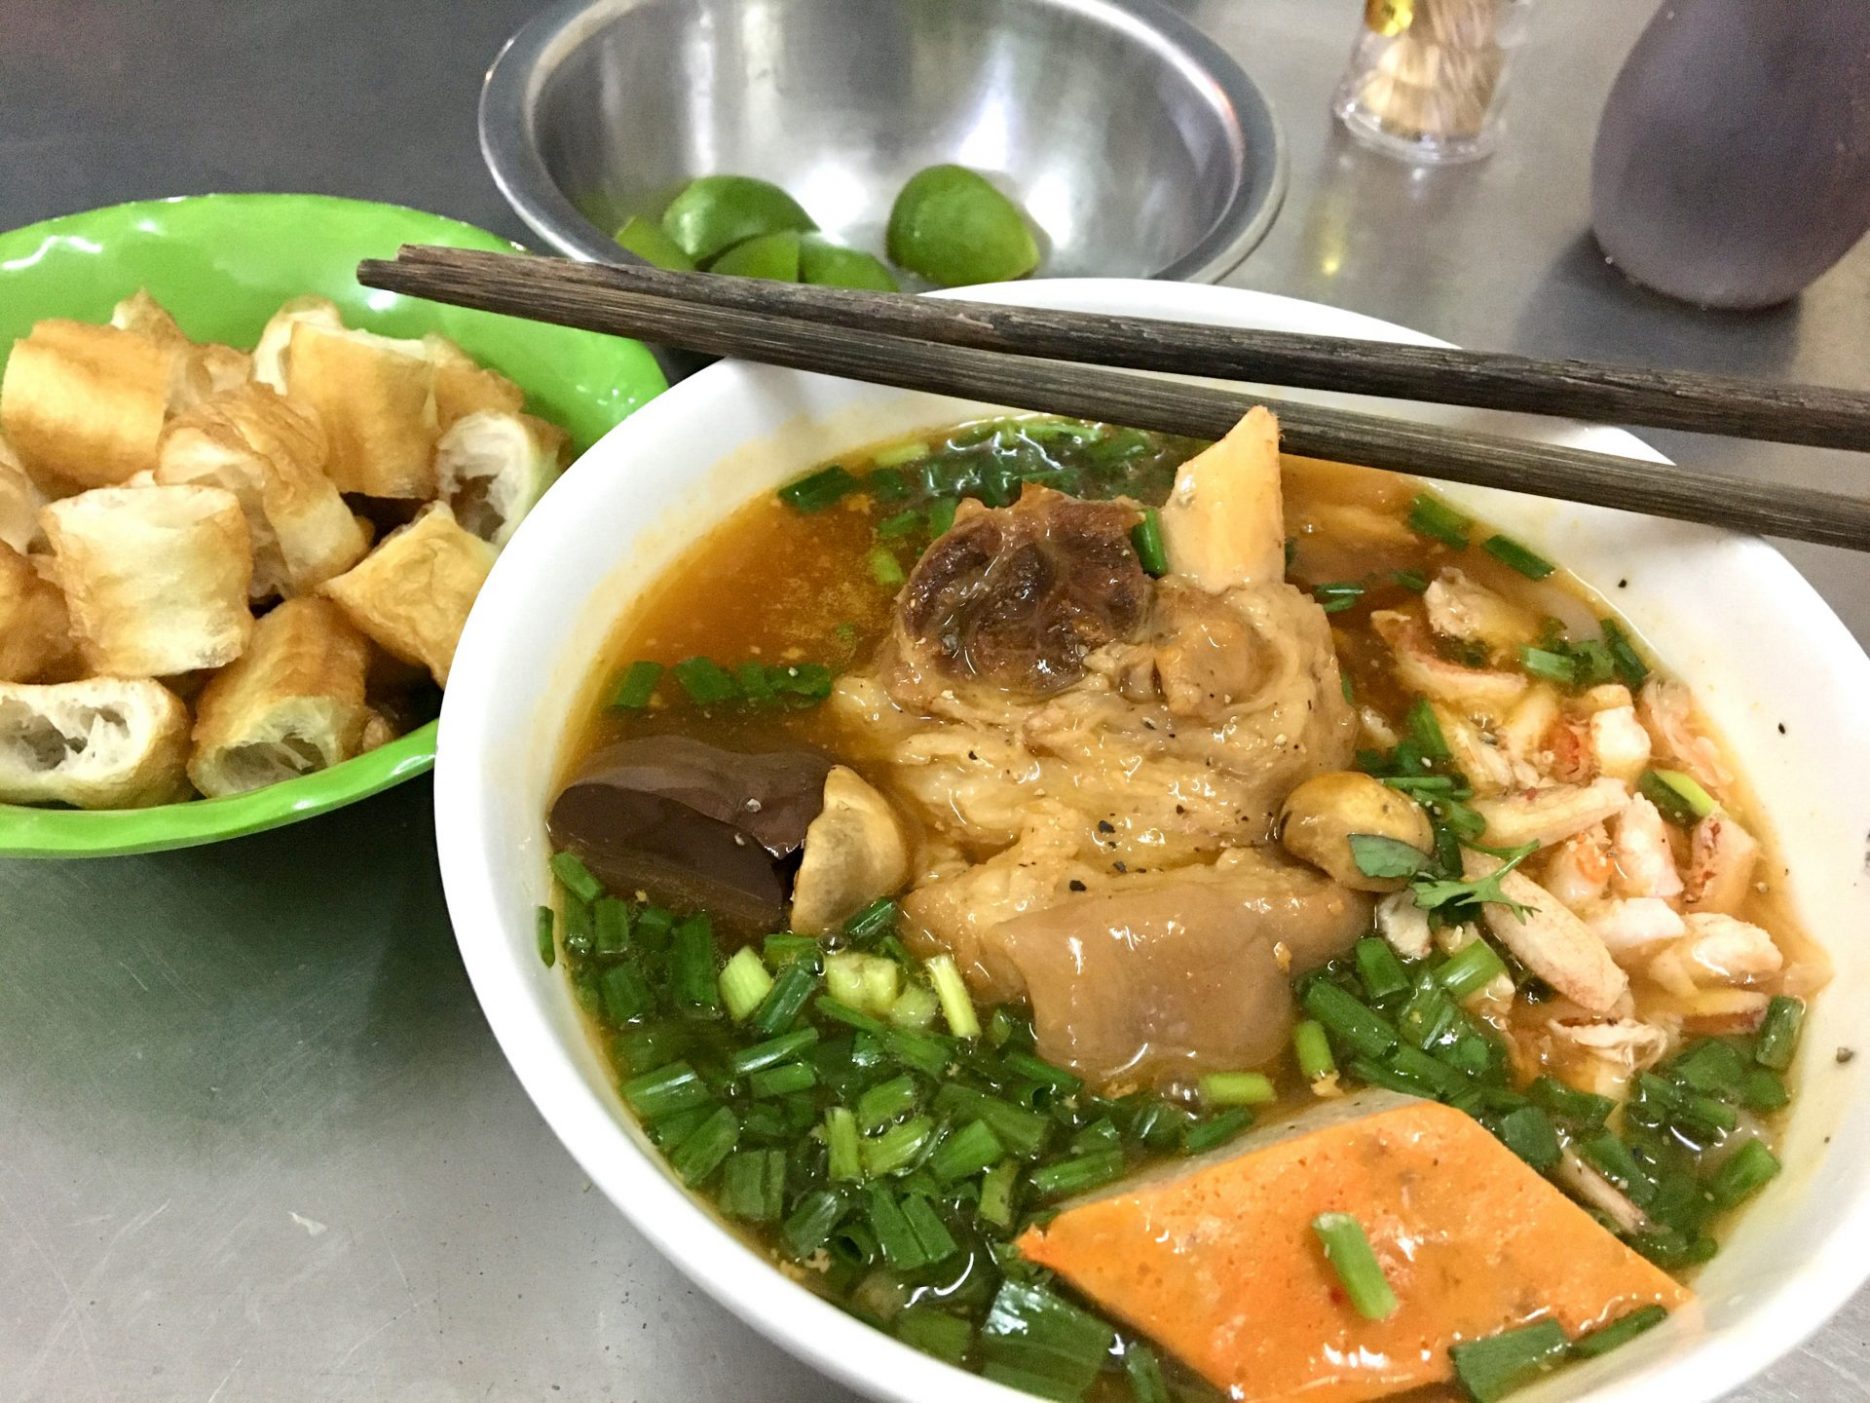 Bánh Canh Cua - Slurpy Rice Noodles with Crab and Pork